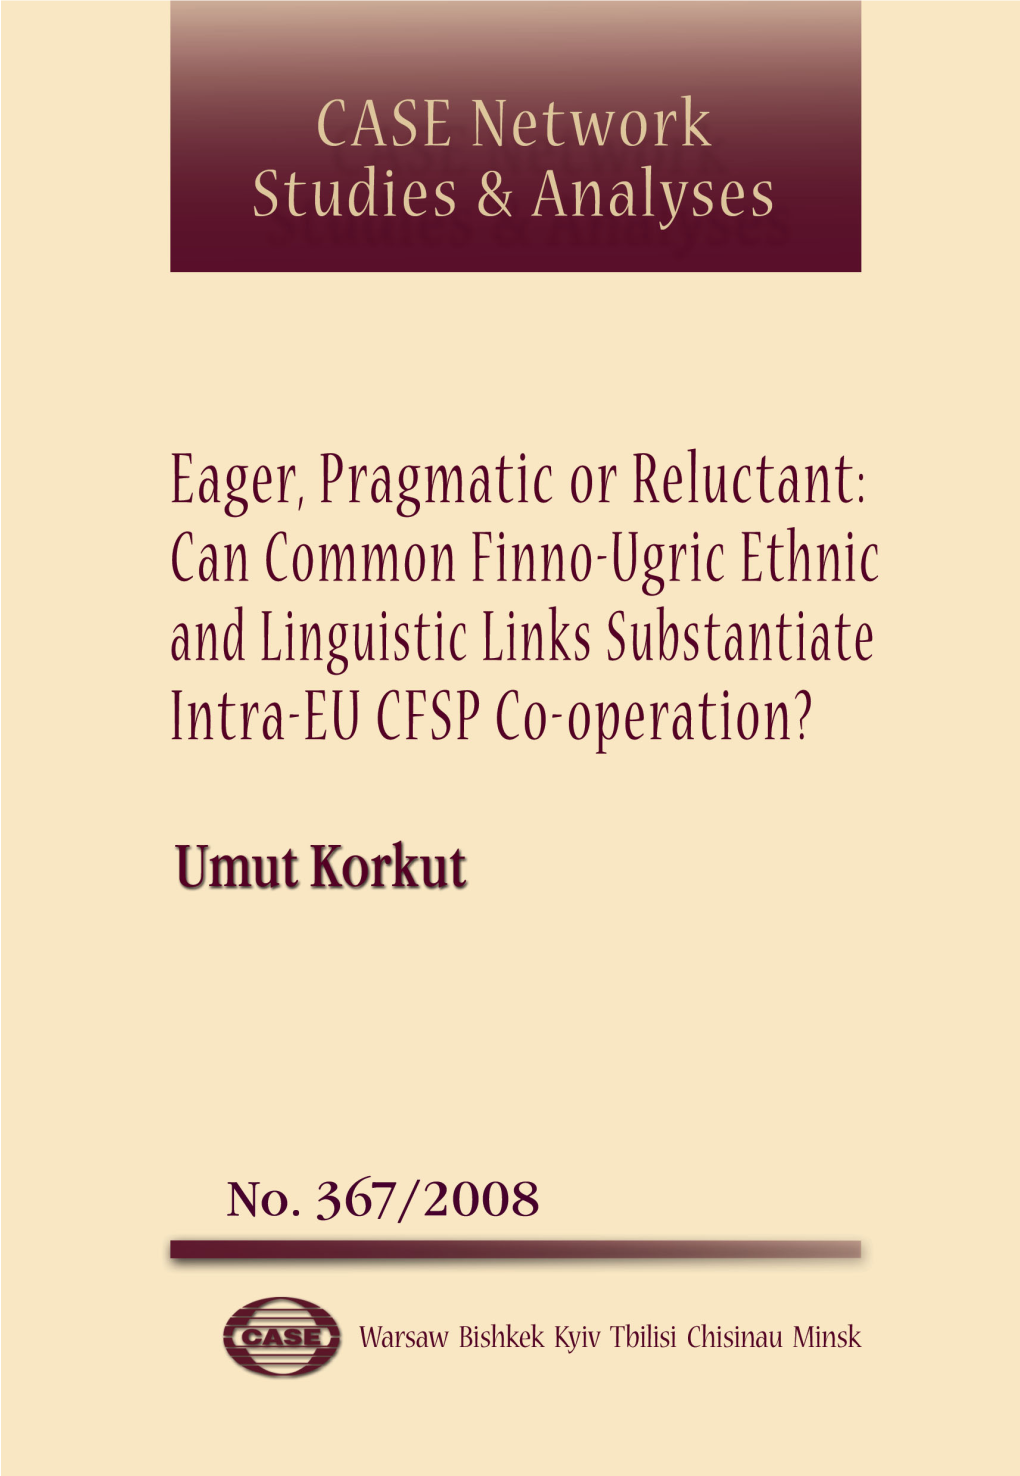 Can Common Finno-Ugric Ethnic and Linguistic Links Substantiate Intra